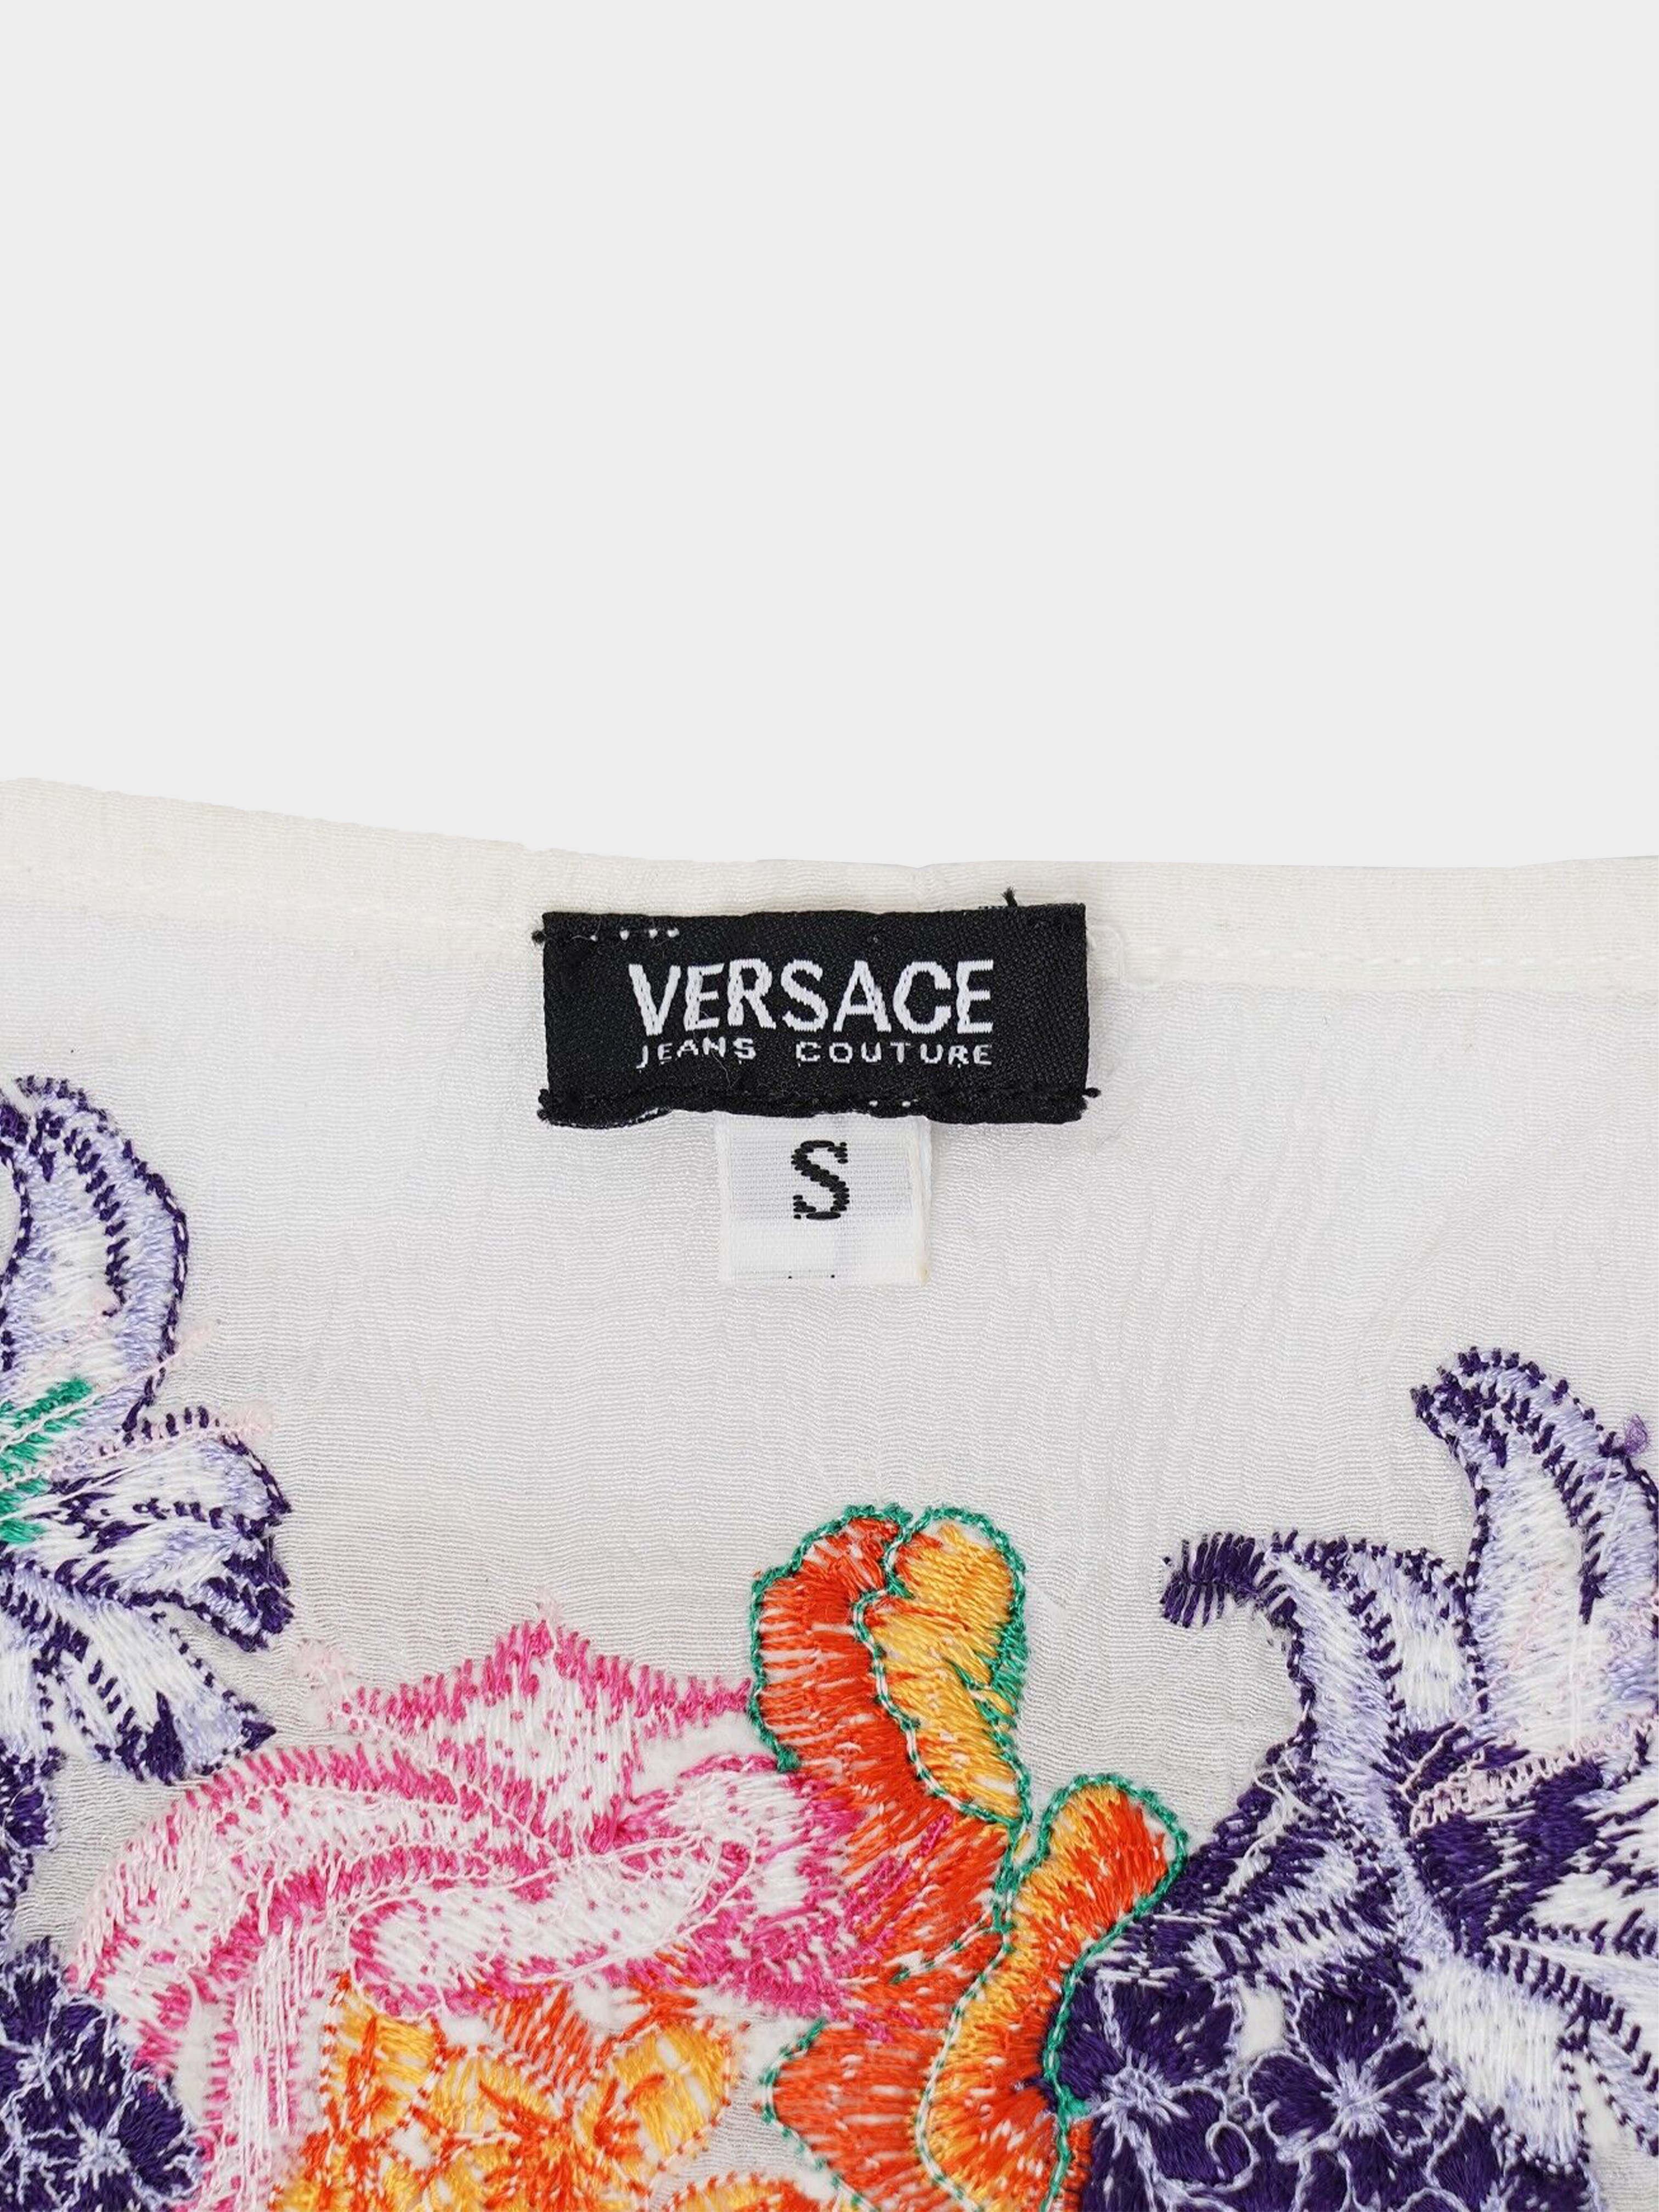 Versace Jeans Couture 2000s White Sheer Embroidery Blouse Shirt